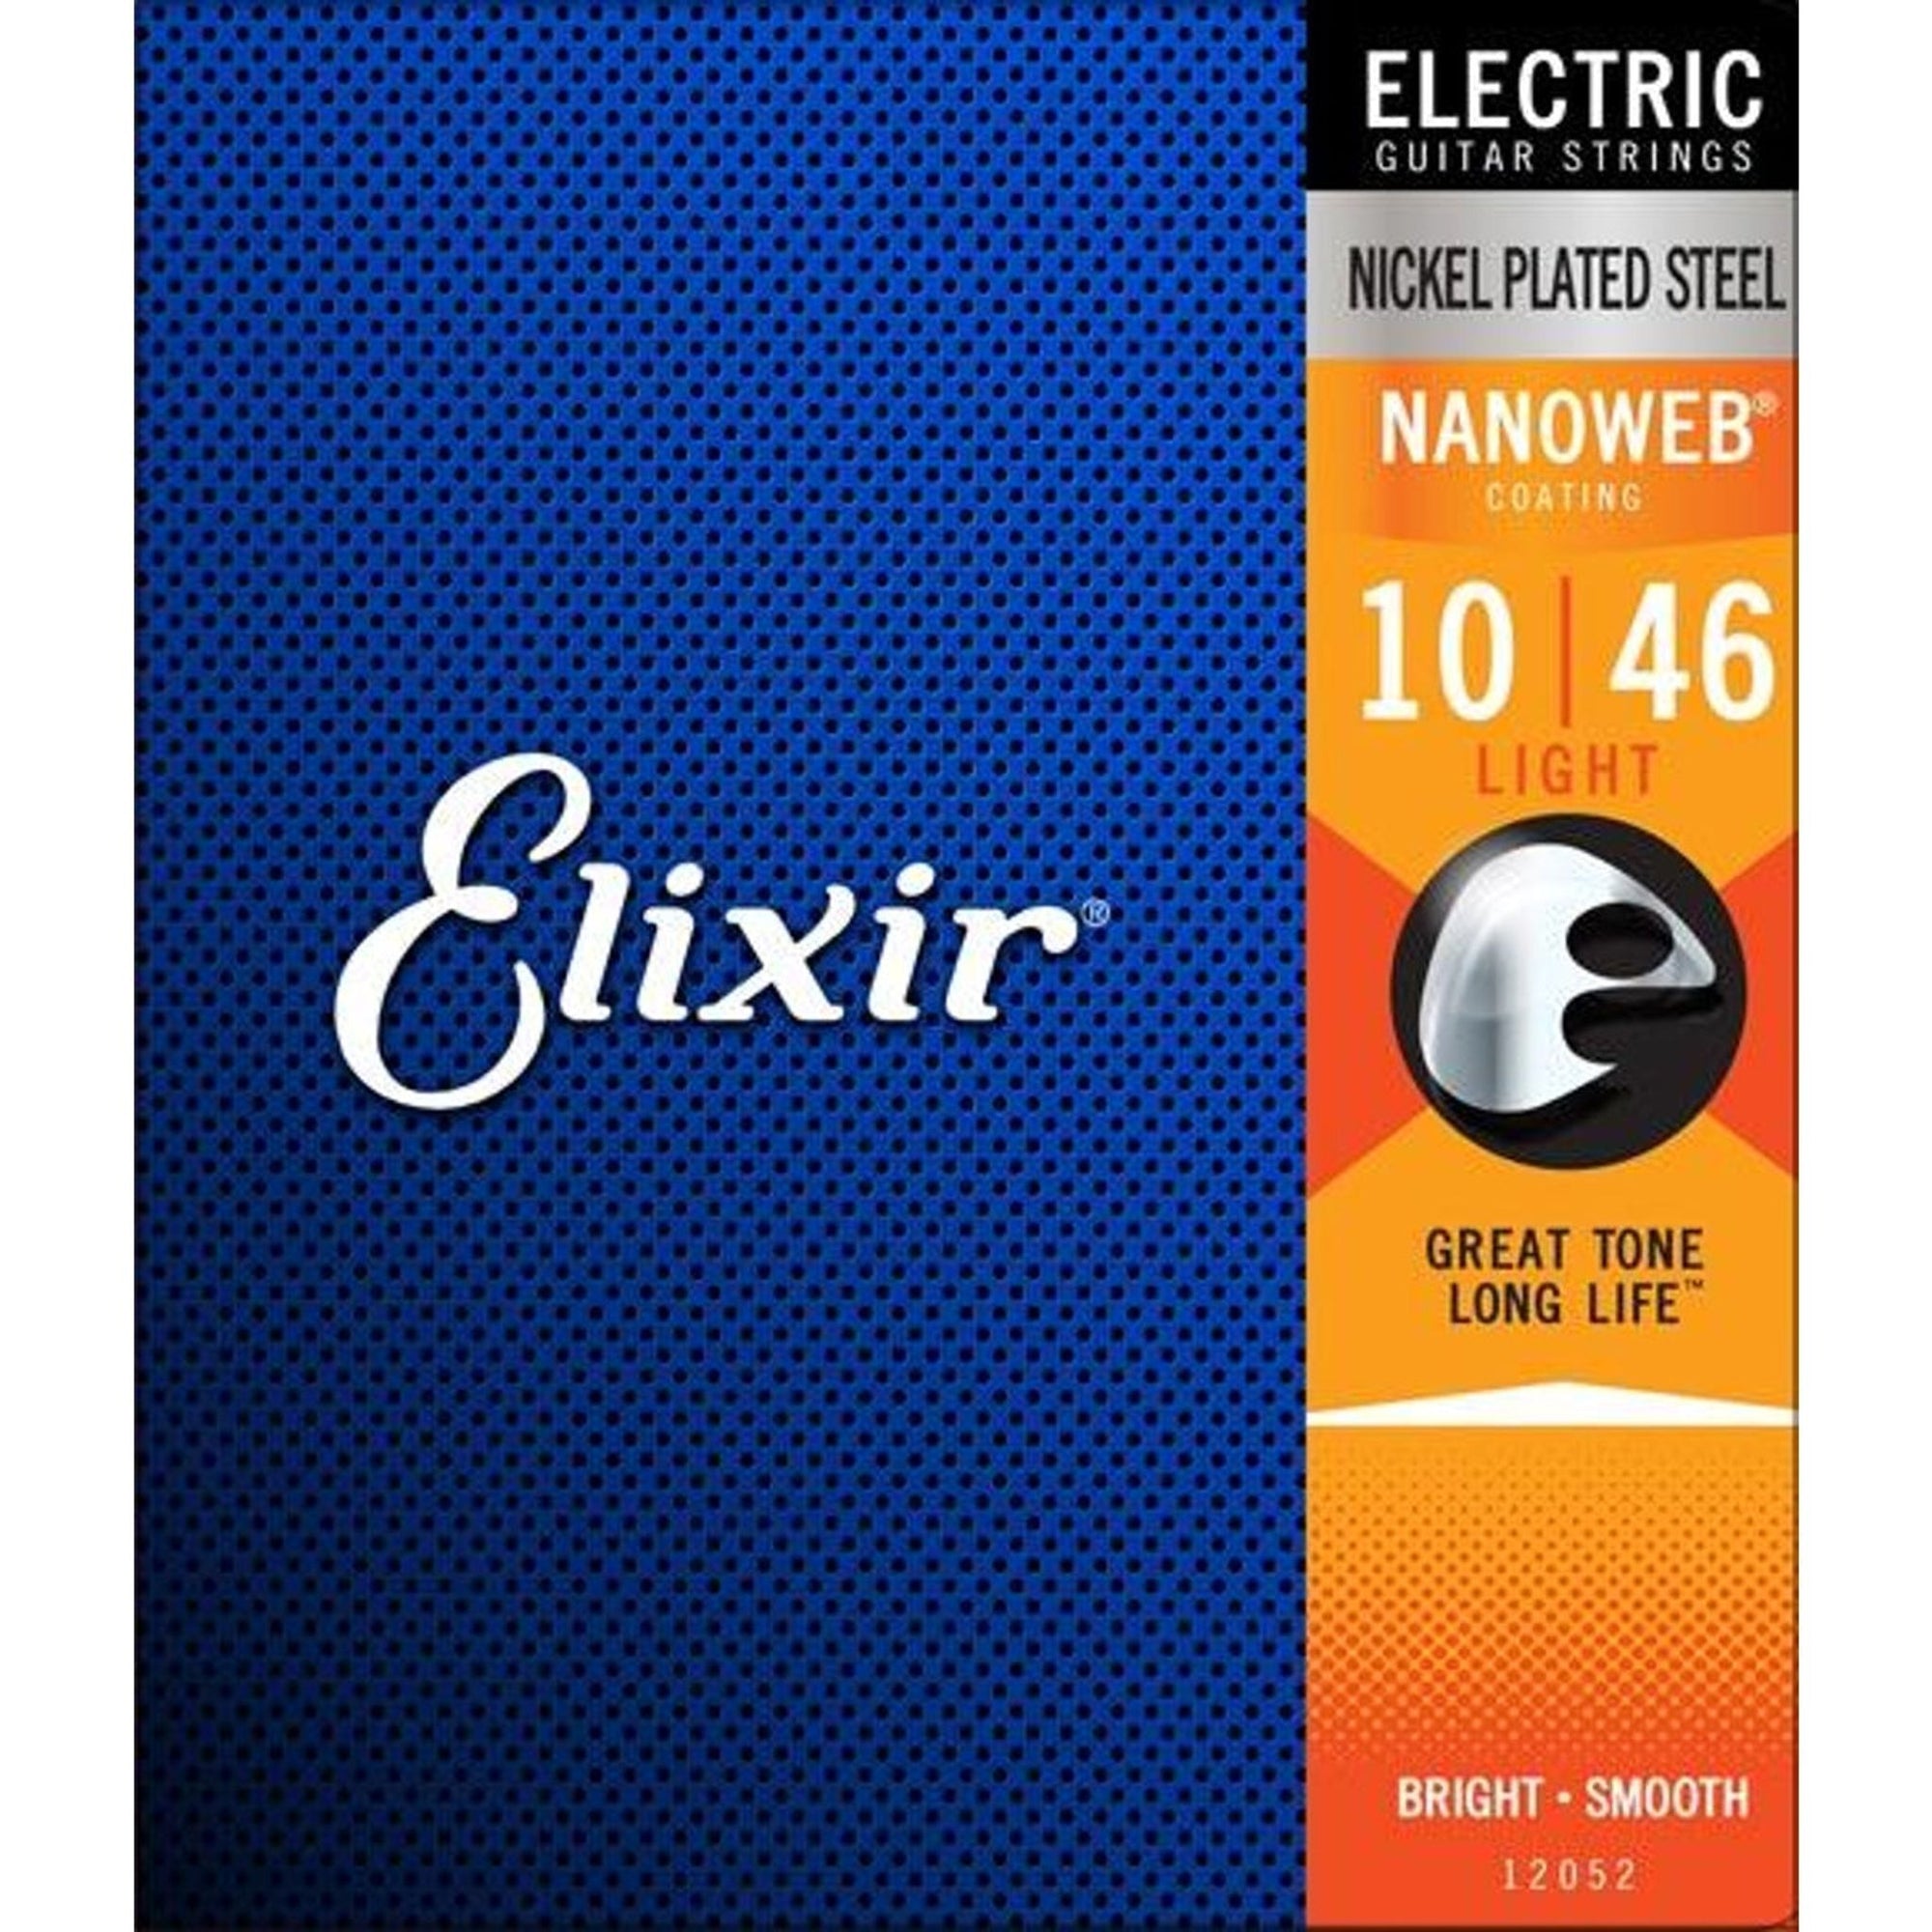 The Elixir 12052 Light Strings are known for their great tone and long life. Elixir strings amp up your guitar’s tone life with the same premium electric guitar strings that experienced players worldwide trust to keep their incredible tone longer than any other string available.